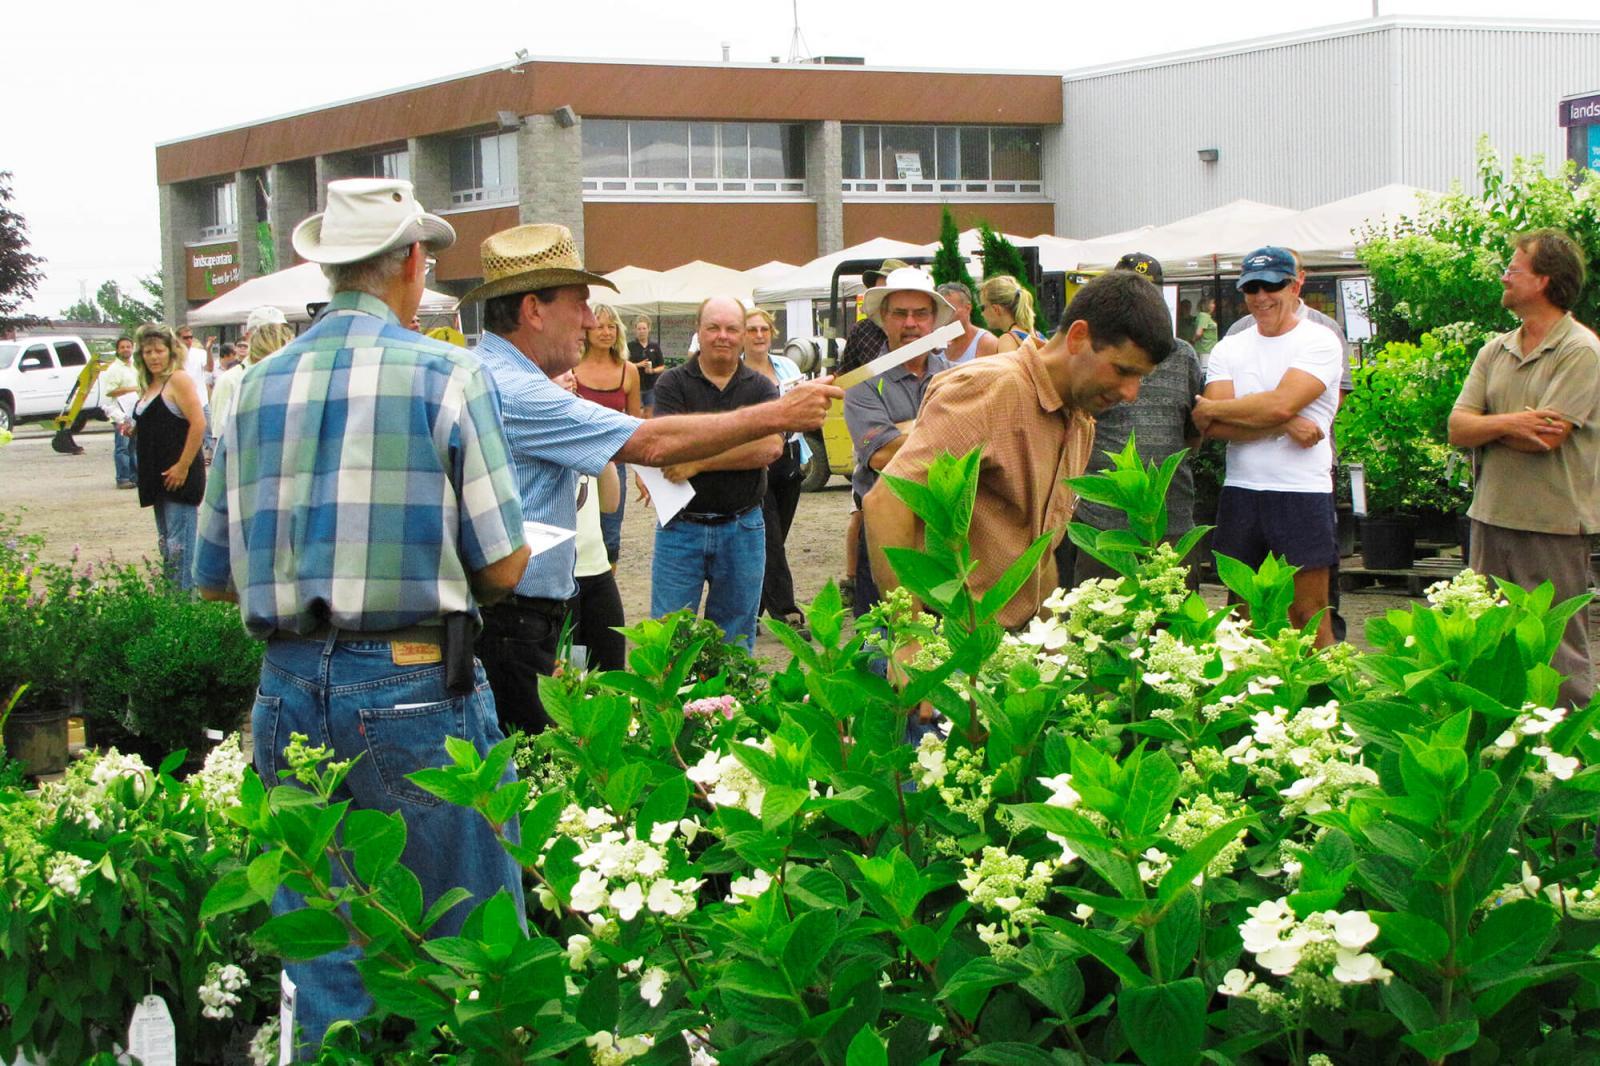 Growers raise over $22,000 at auction